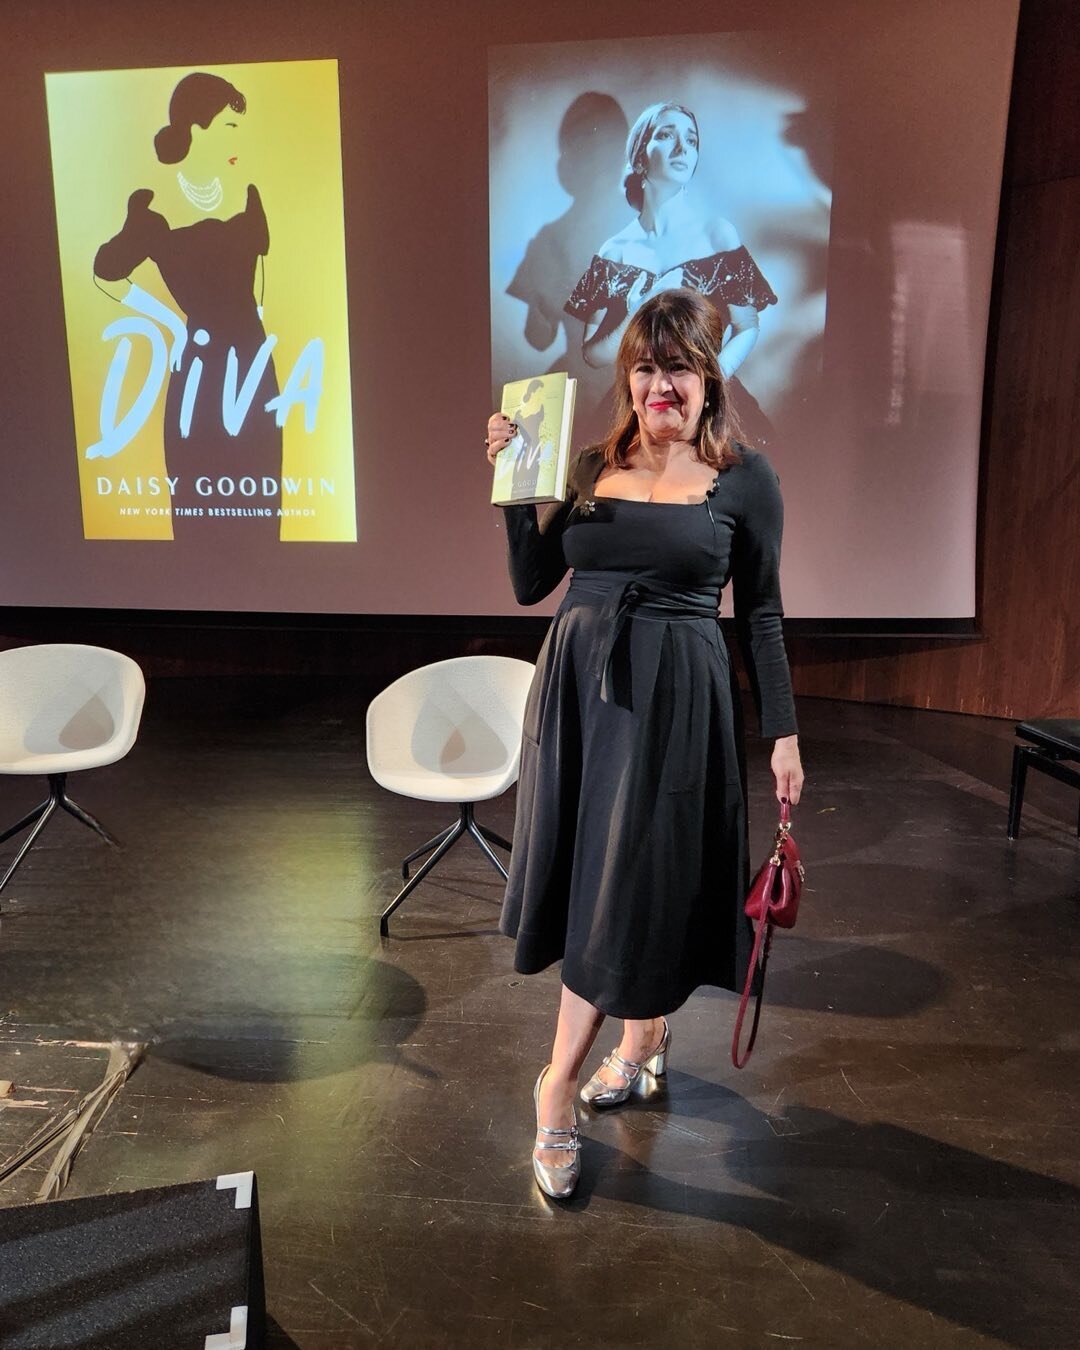 Big Night at the V&amp;A - launching #DivaTheBook . A full house and a spirited discussion with Rupert Christiansen about the merits of Maria Callas- @V&amp;A @jasperconranlondon for the dress